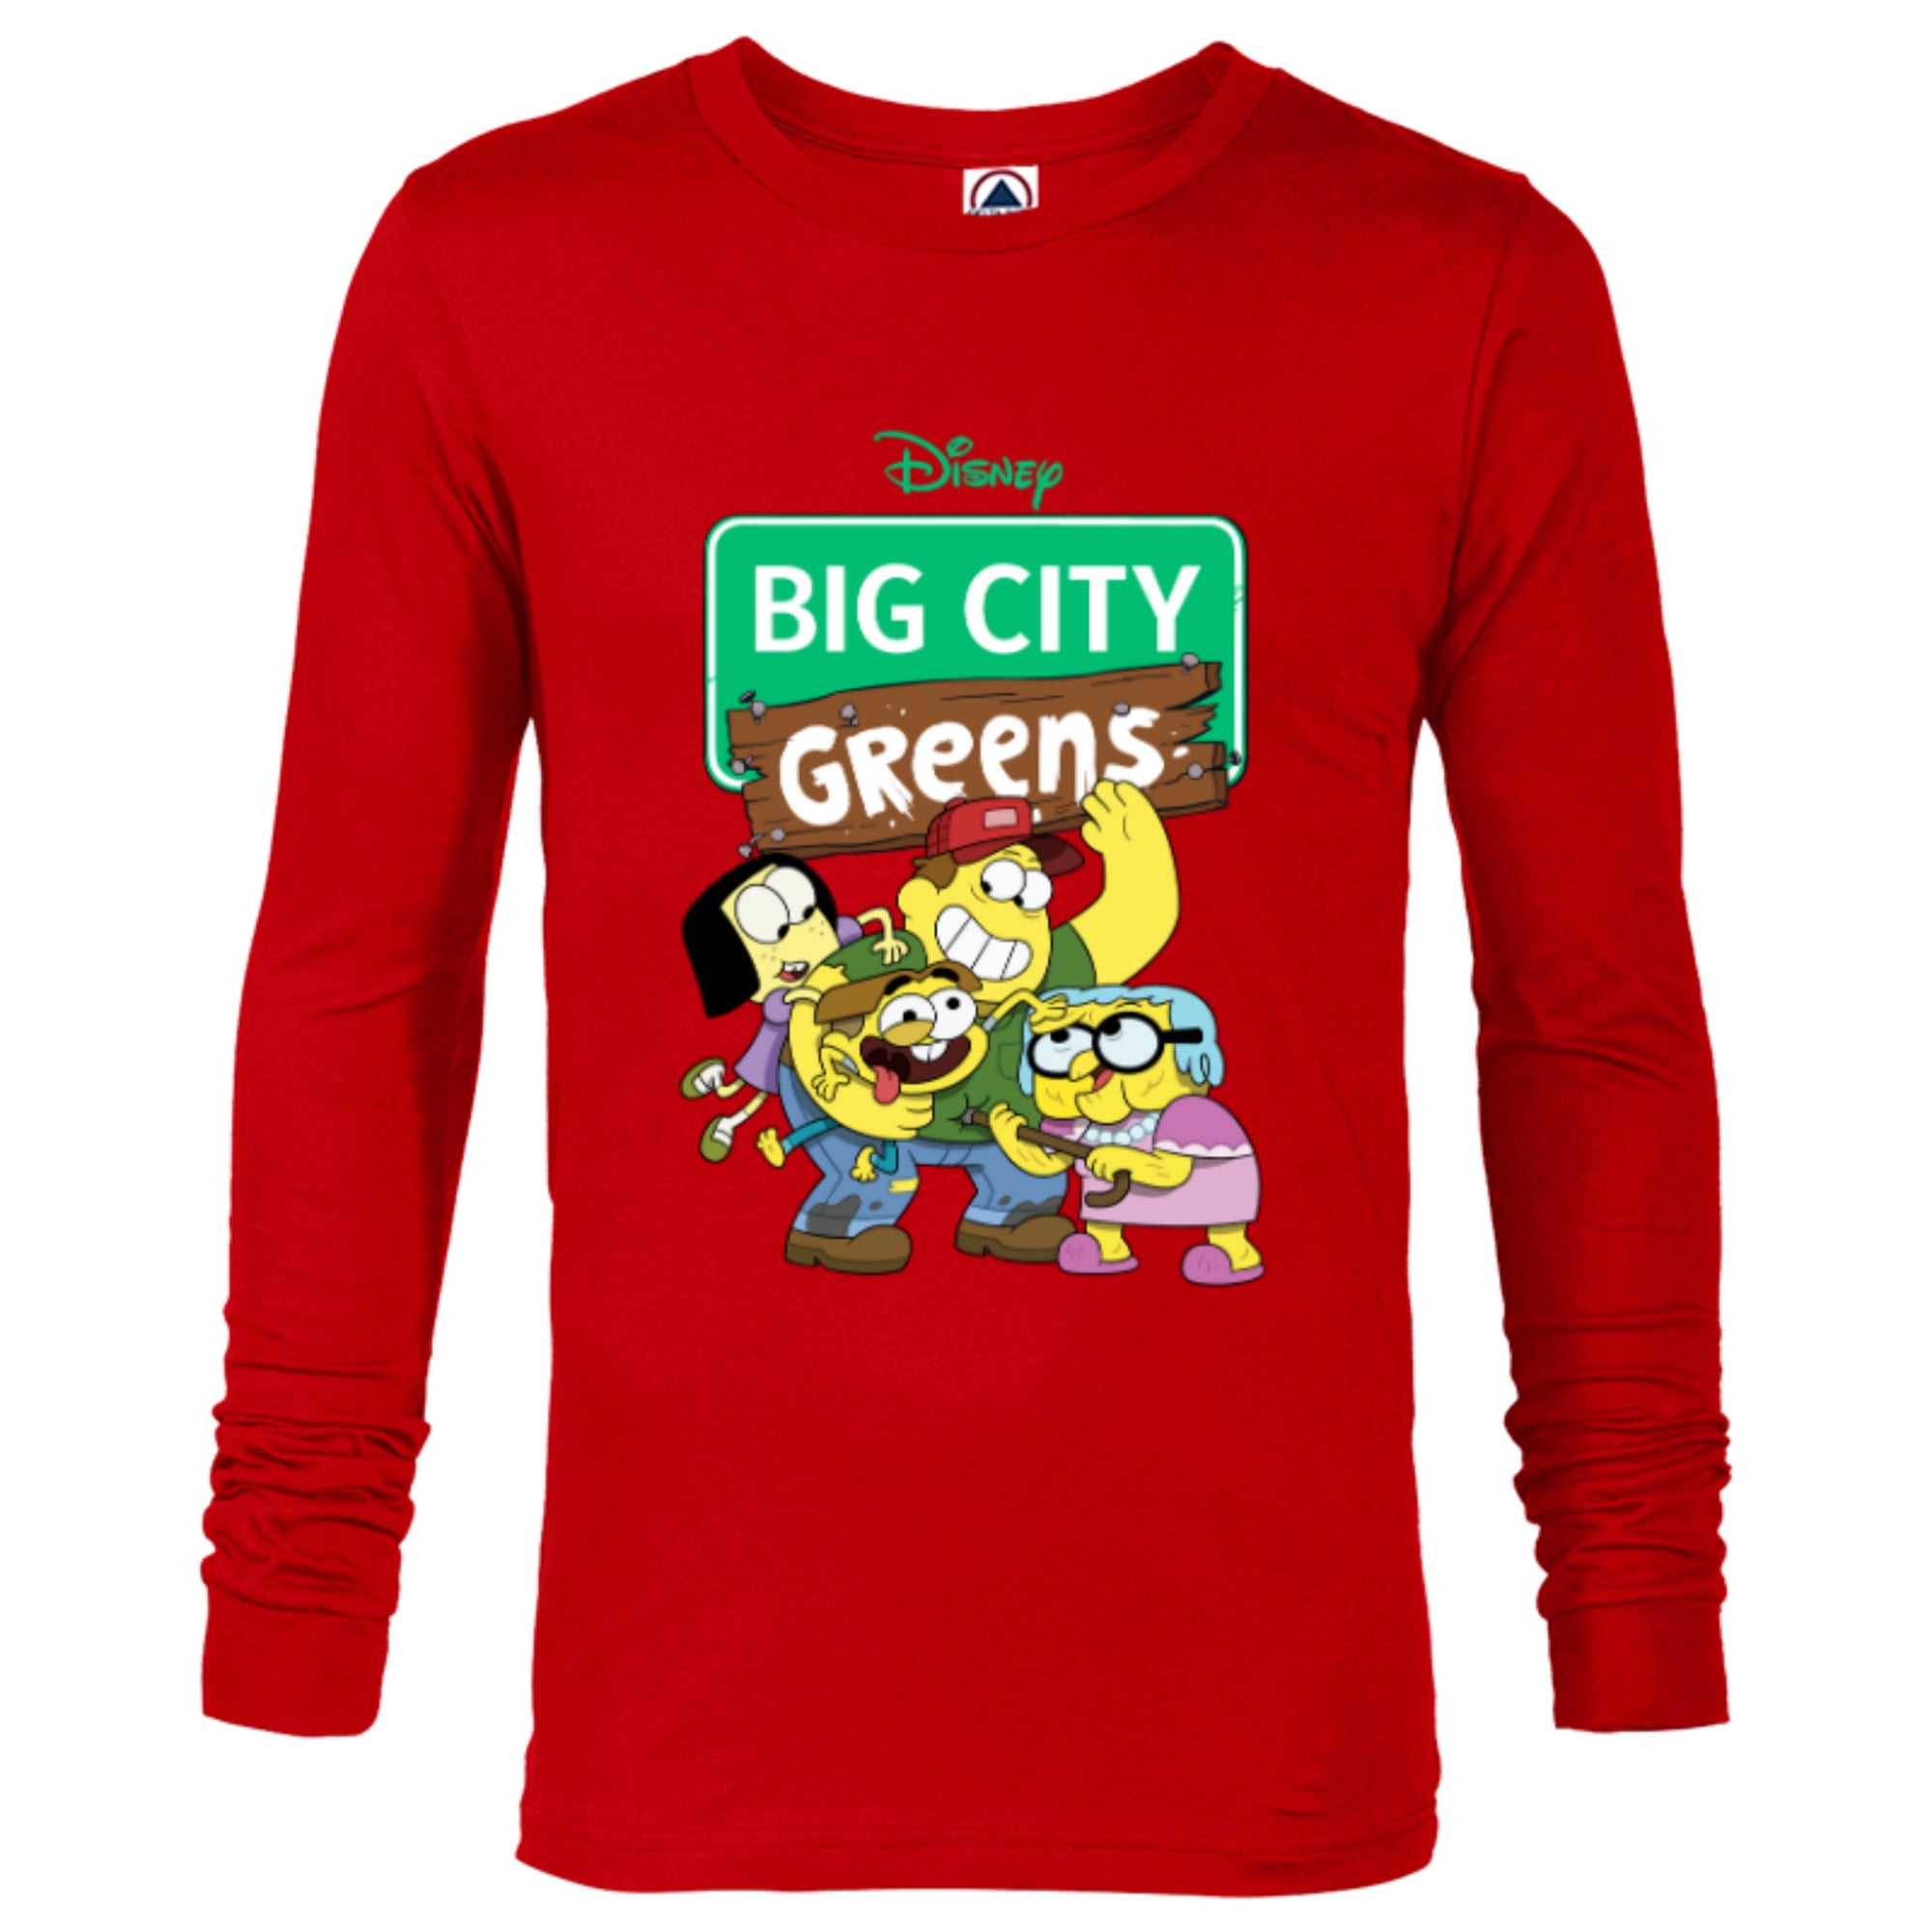 Disney Channel Big City Greens - Long Sleeve T-Shirt for Men  -Customized-Athletic Heather